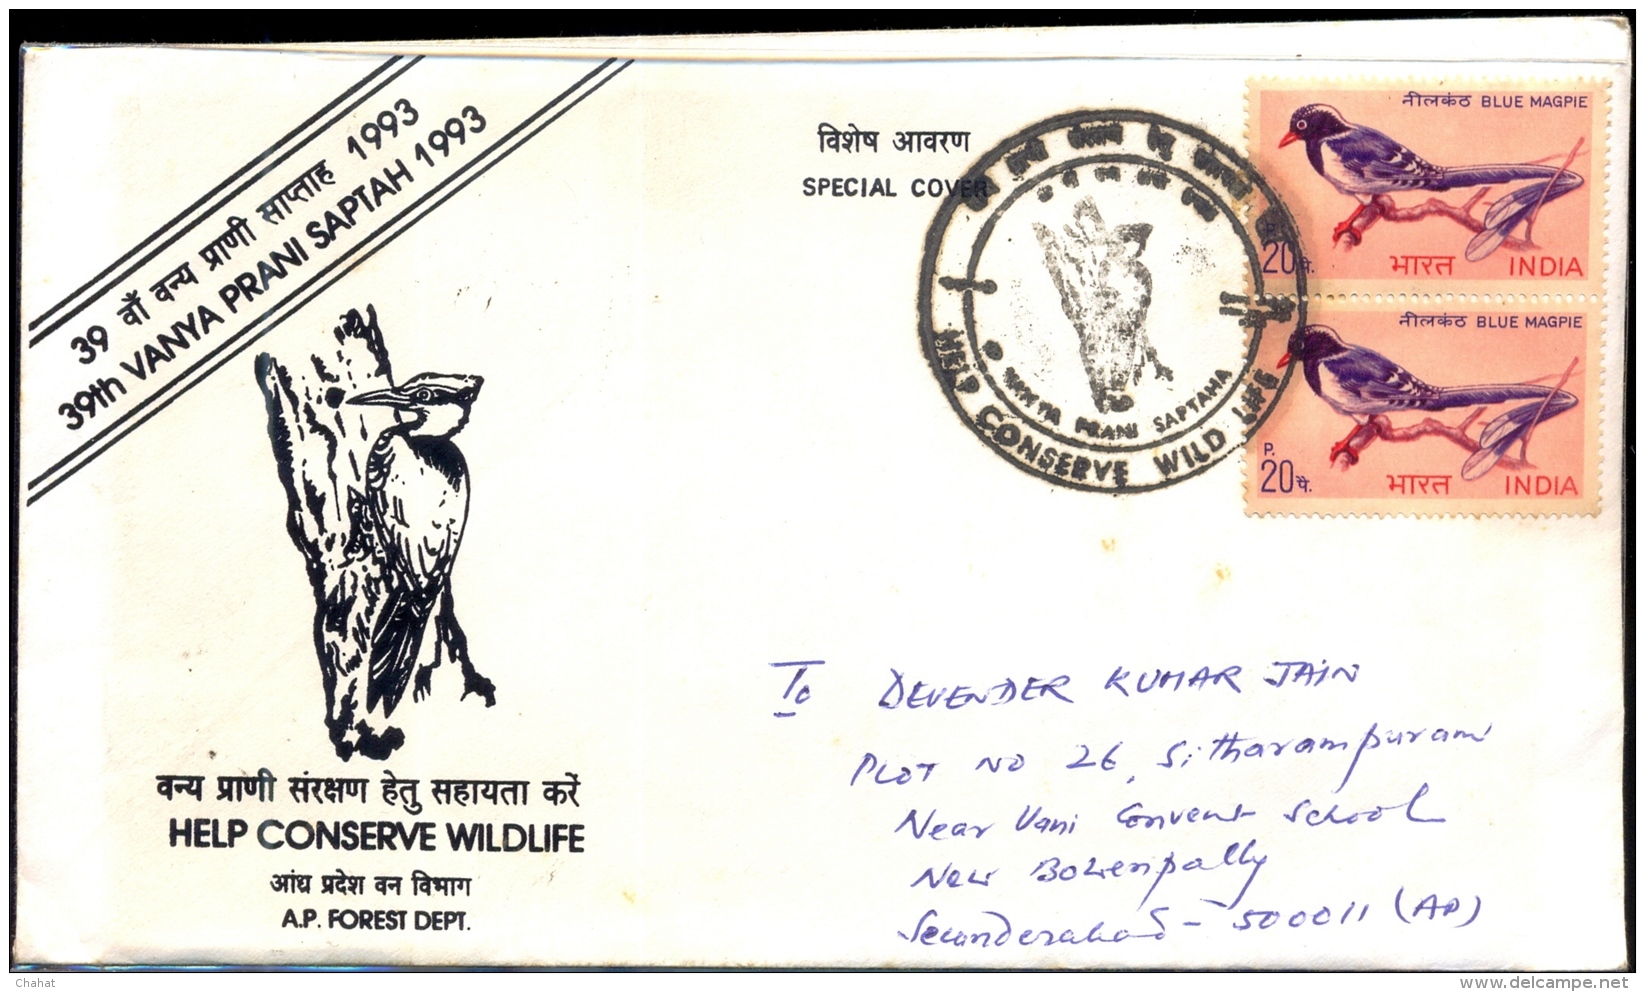 BIRDS-BLUE MAGPIE-INDIAN BIRDS SERIES-ERROR-CORNER STRIP OF 4-INDIA-1968-WITH A SPECIAL COVER-BX1-369 - Cuco, Cuclillos